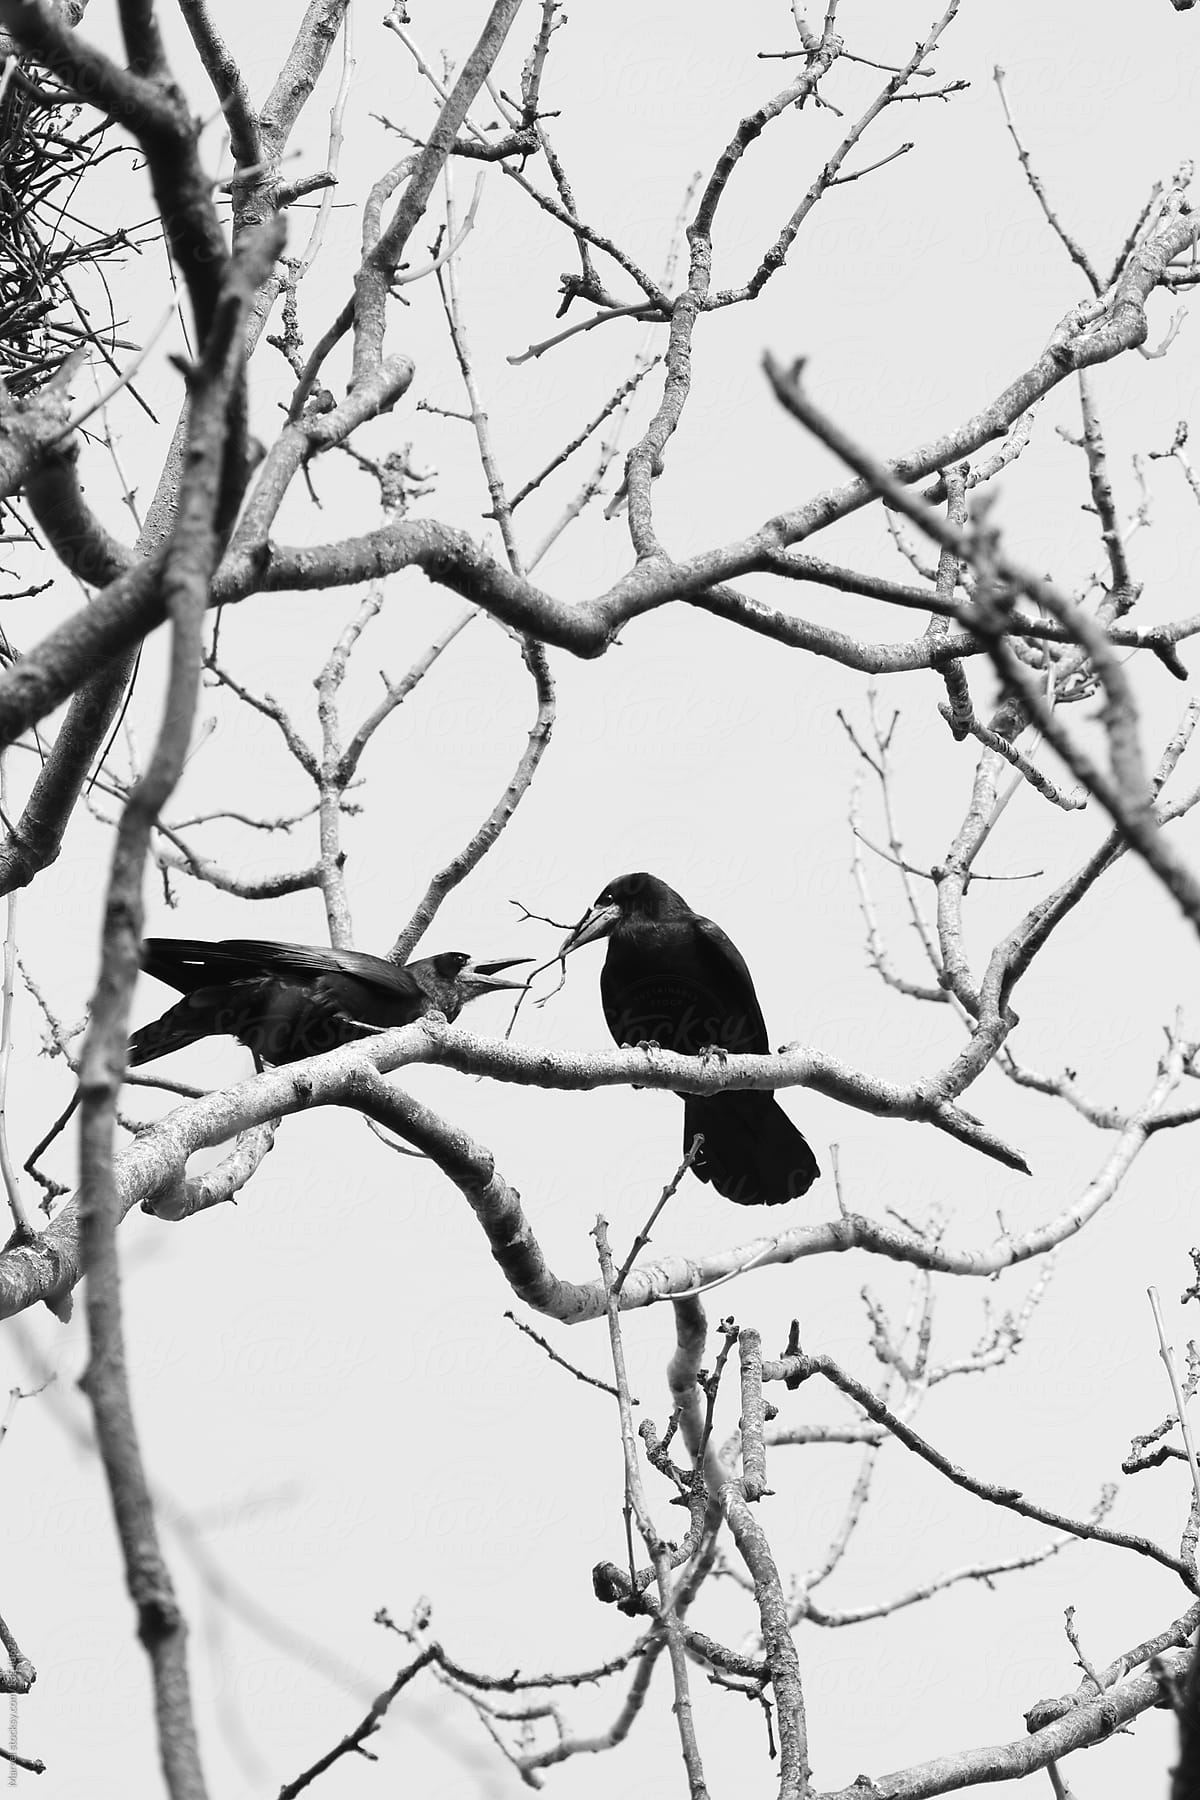 Rooks up in a tree in early spring